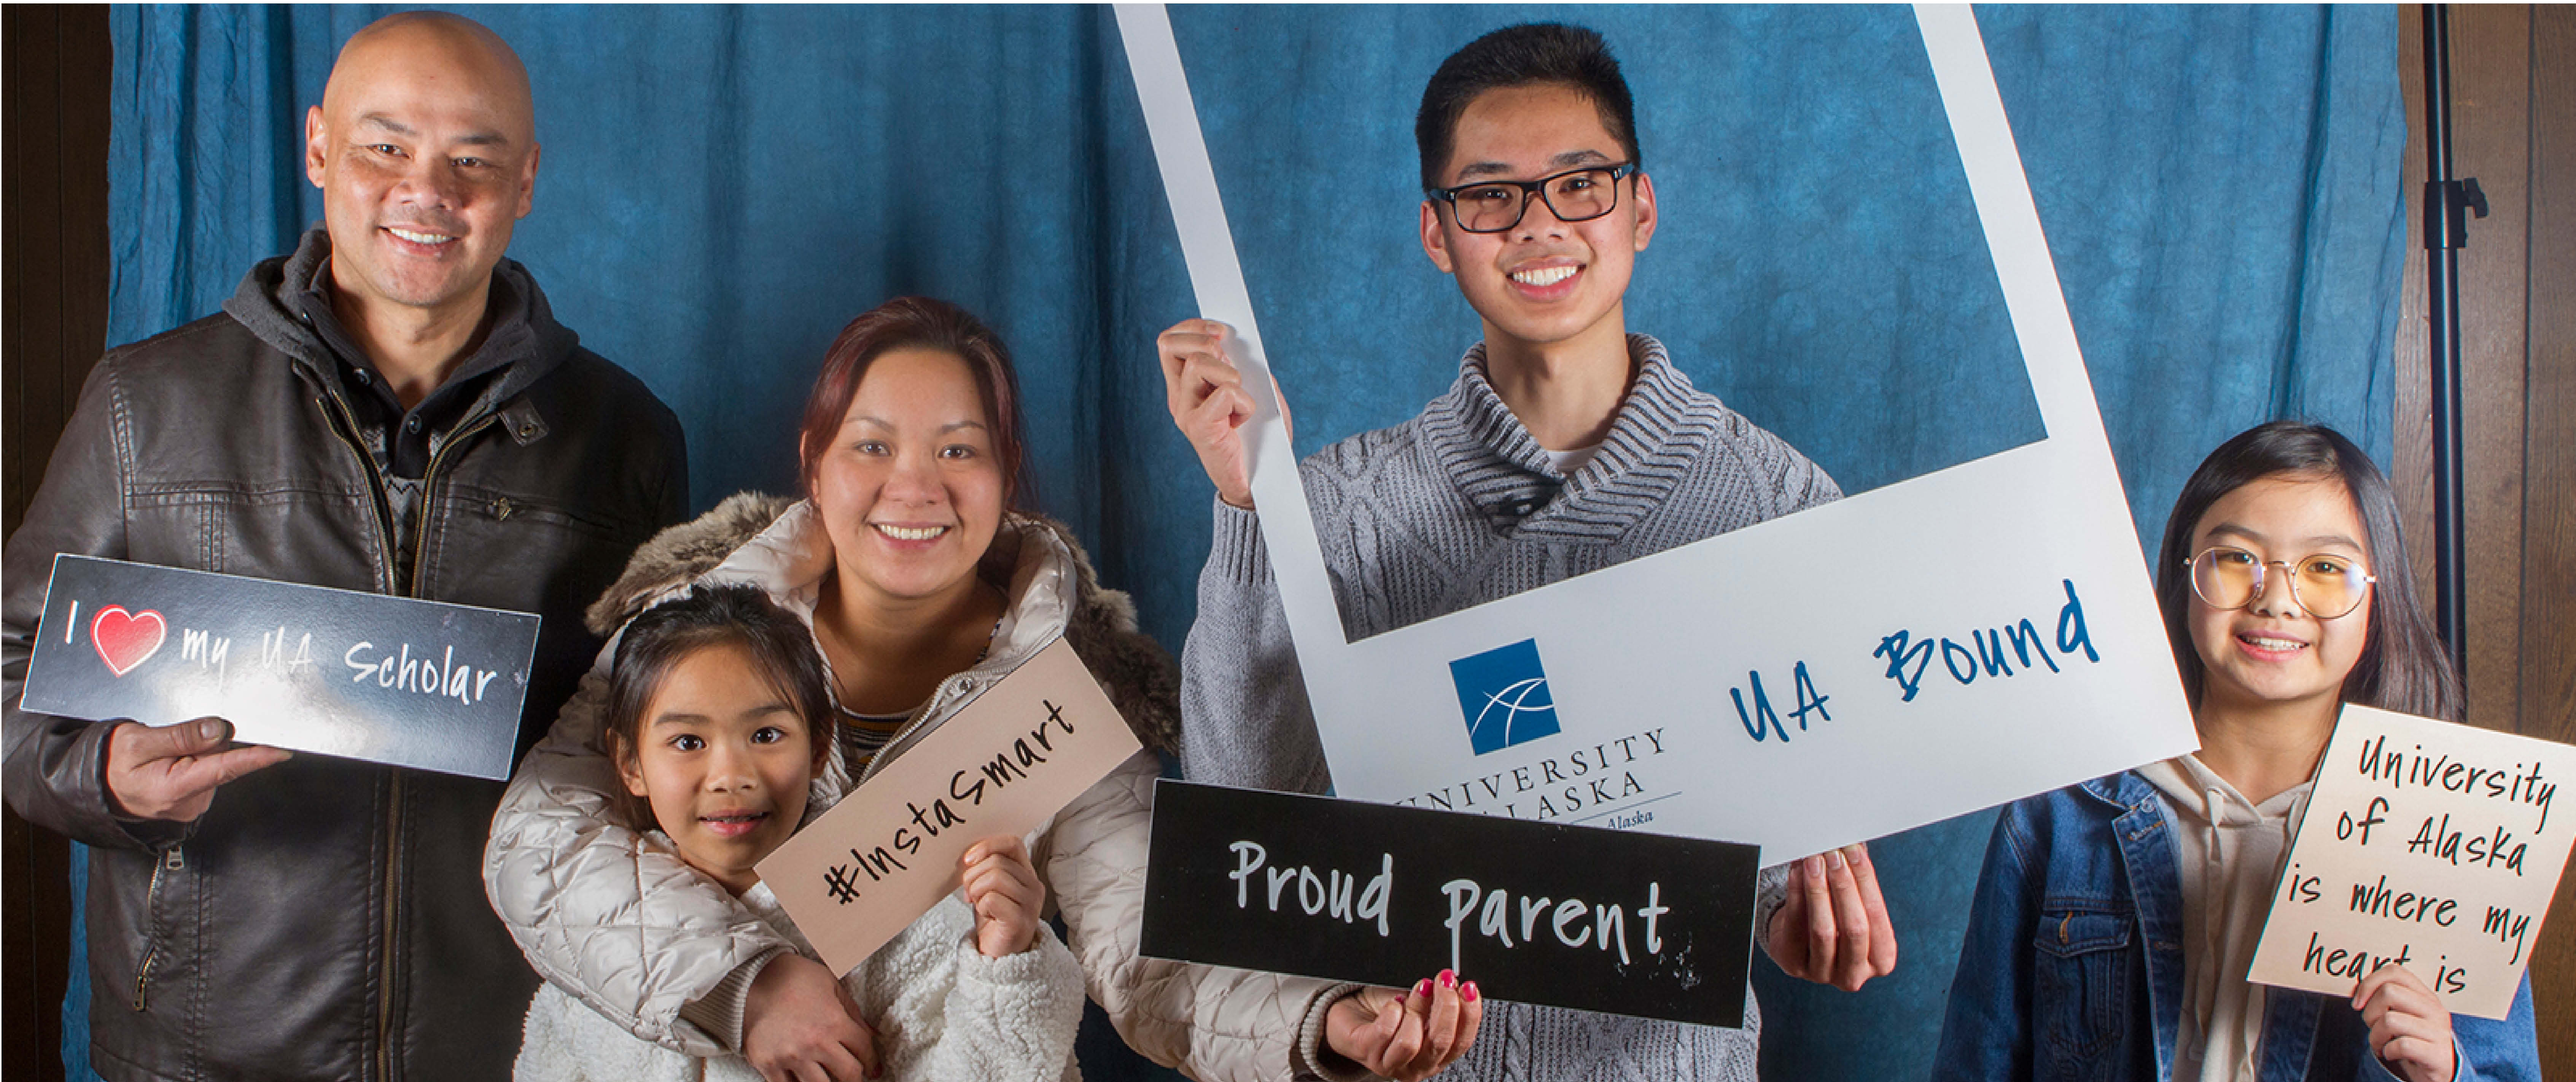 Family standing in photo booth holding signs